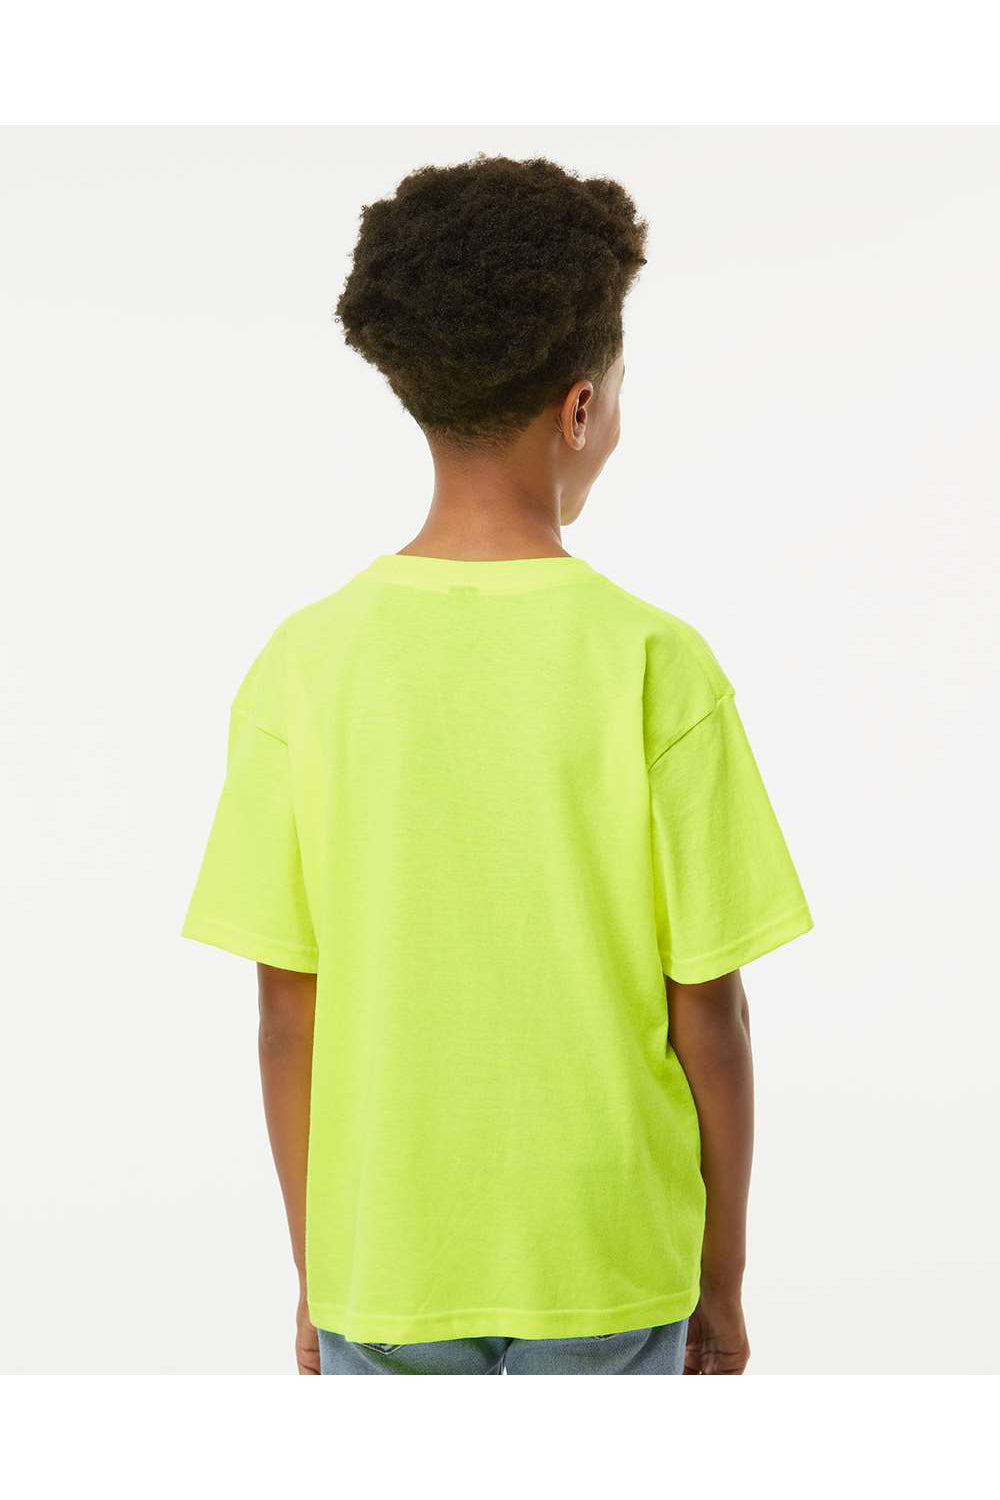 M&O 4850 Youth Gold Soft Touch Short Sleeve Crewneck T-Shirt Safety Green Model Back